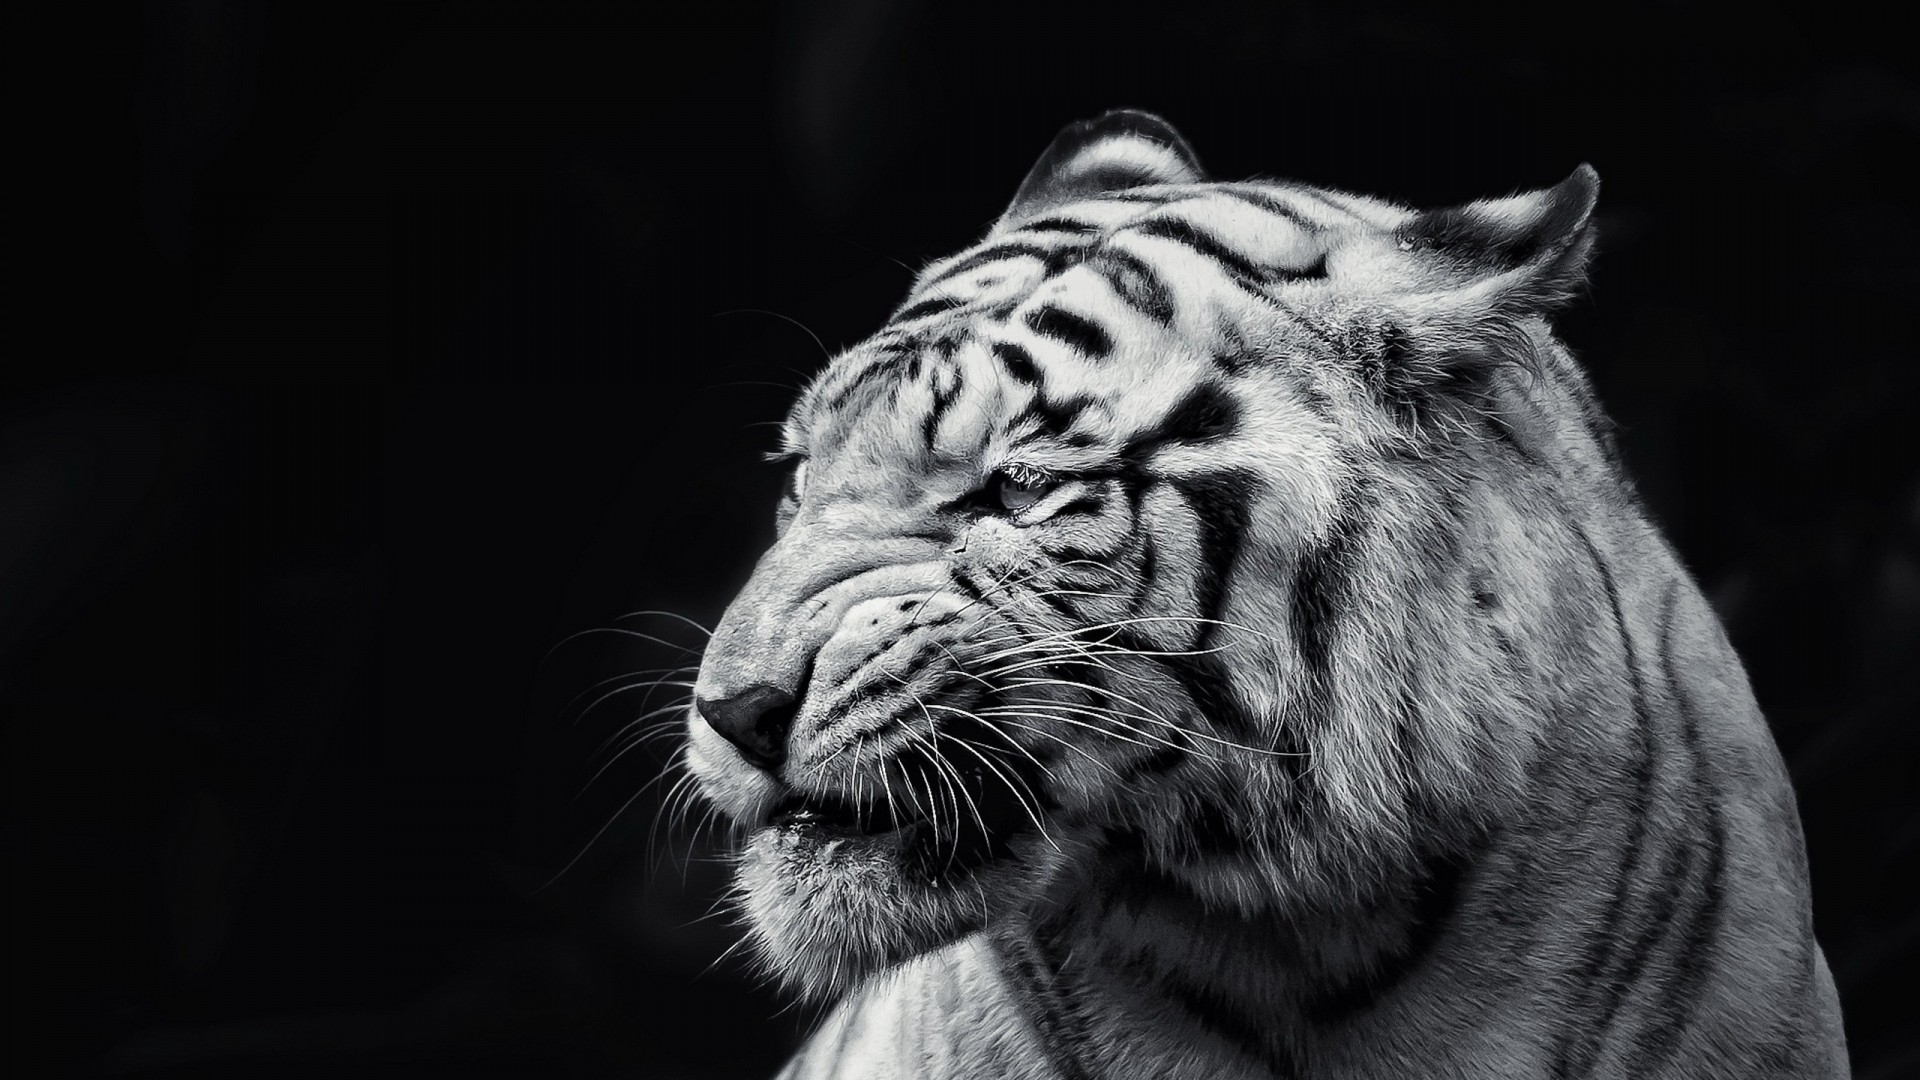 Background Full HD 1080p. Wallpaper tiger, face, eyes, black and white